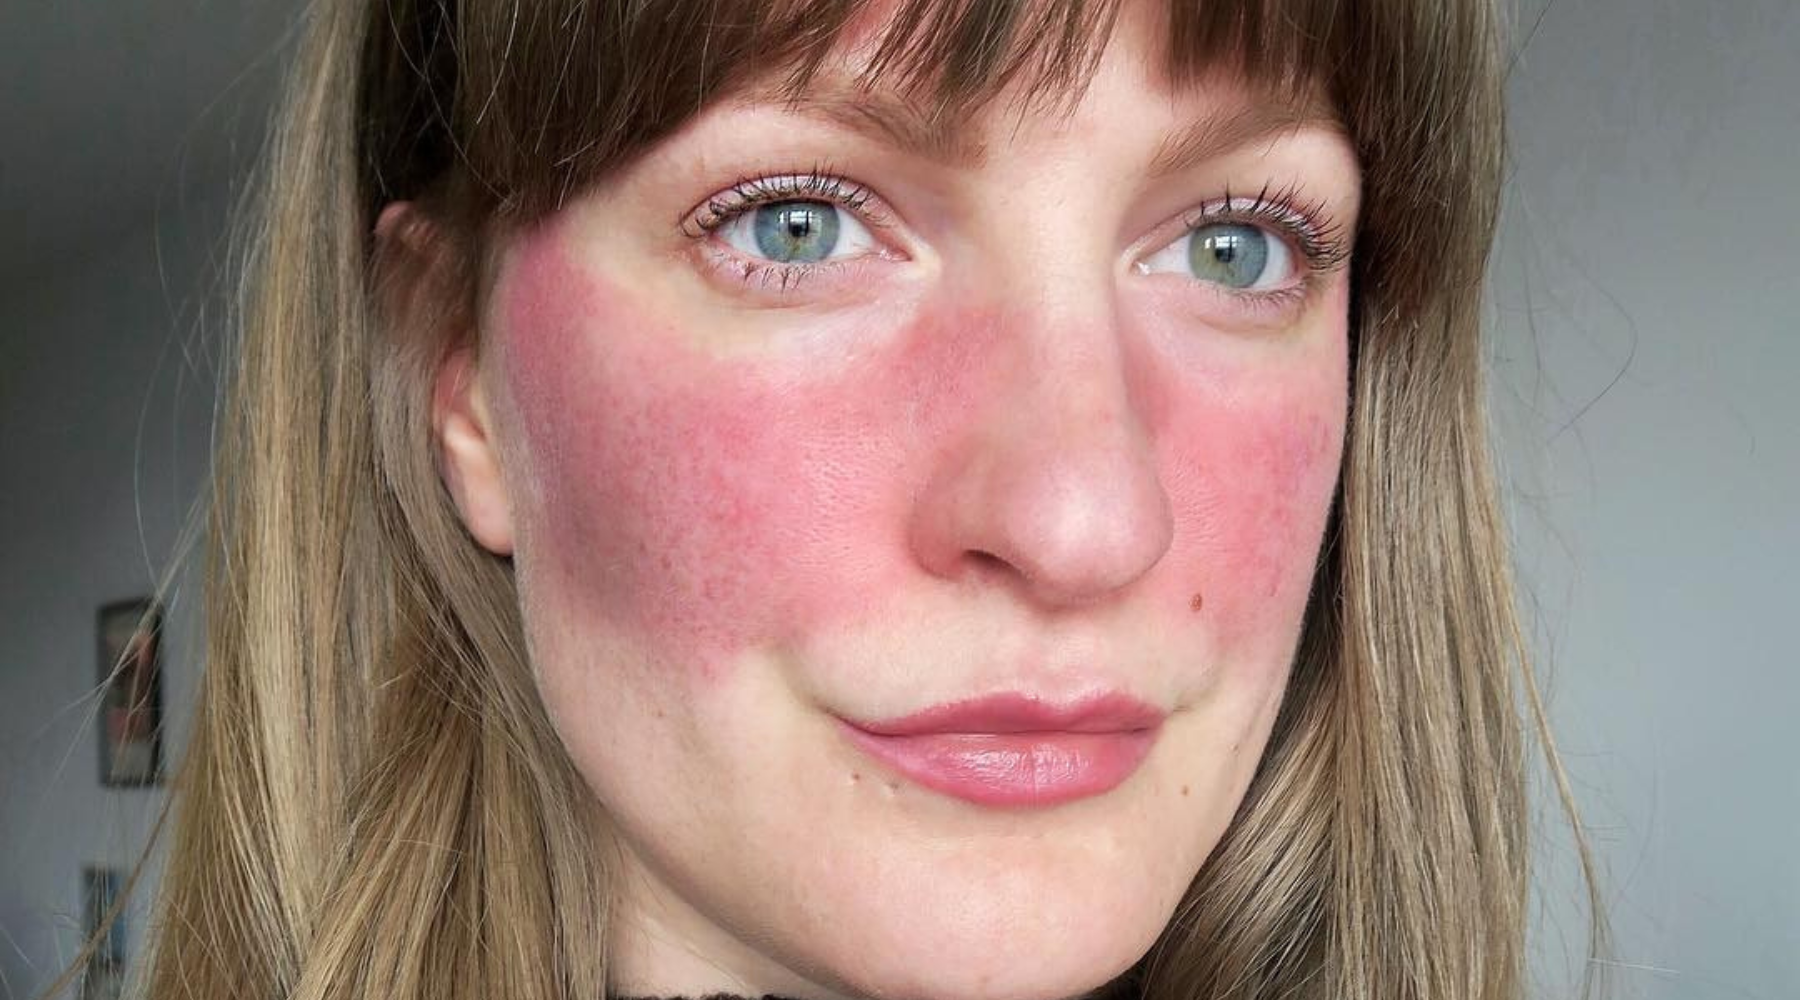 Young woman with visible rosacea on the cheeks and nose